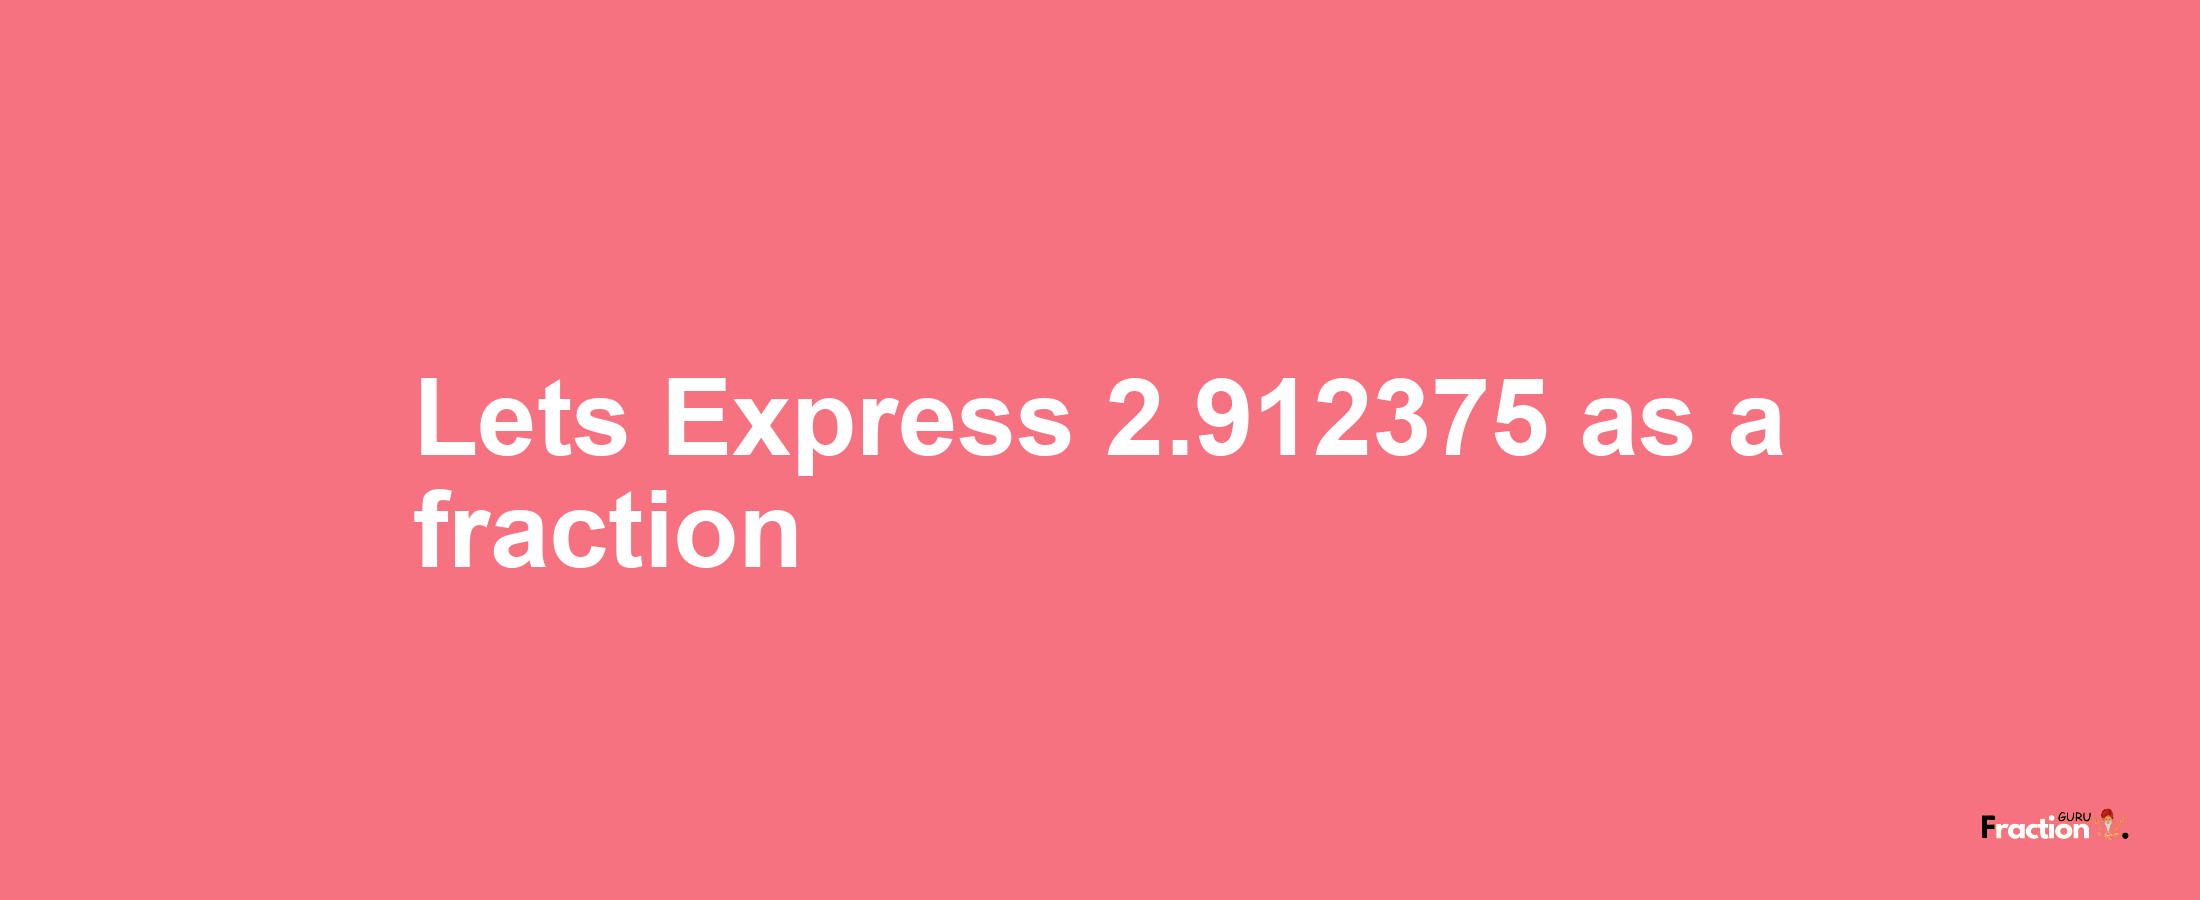 Lets Express 2.912375 as afraction